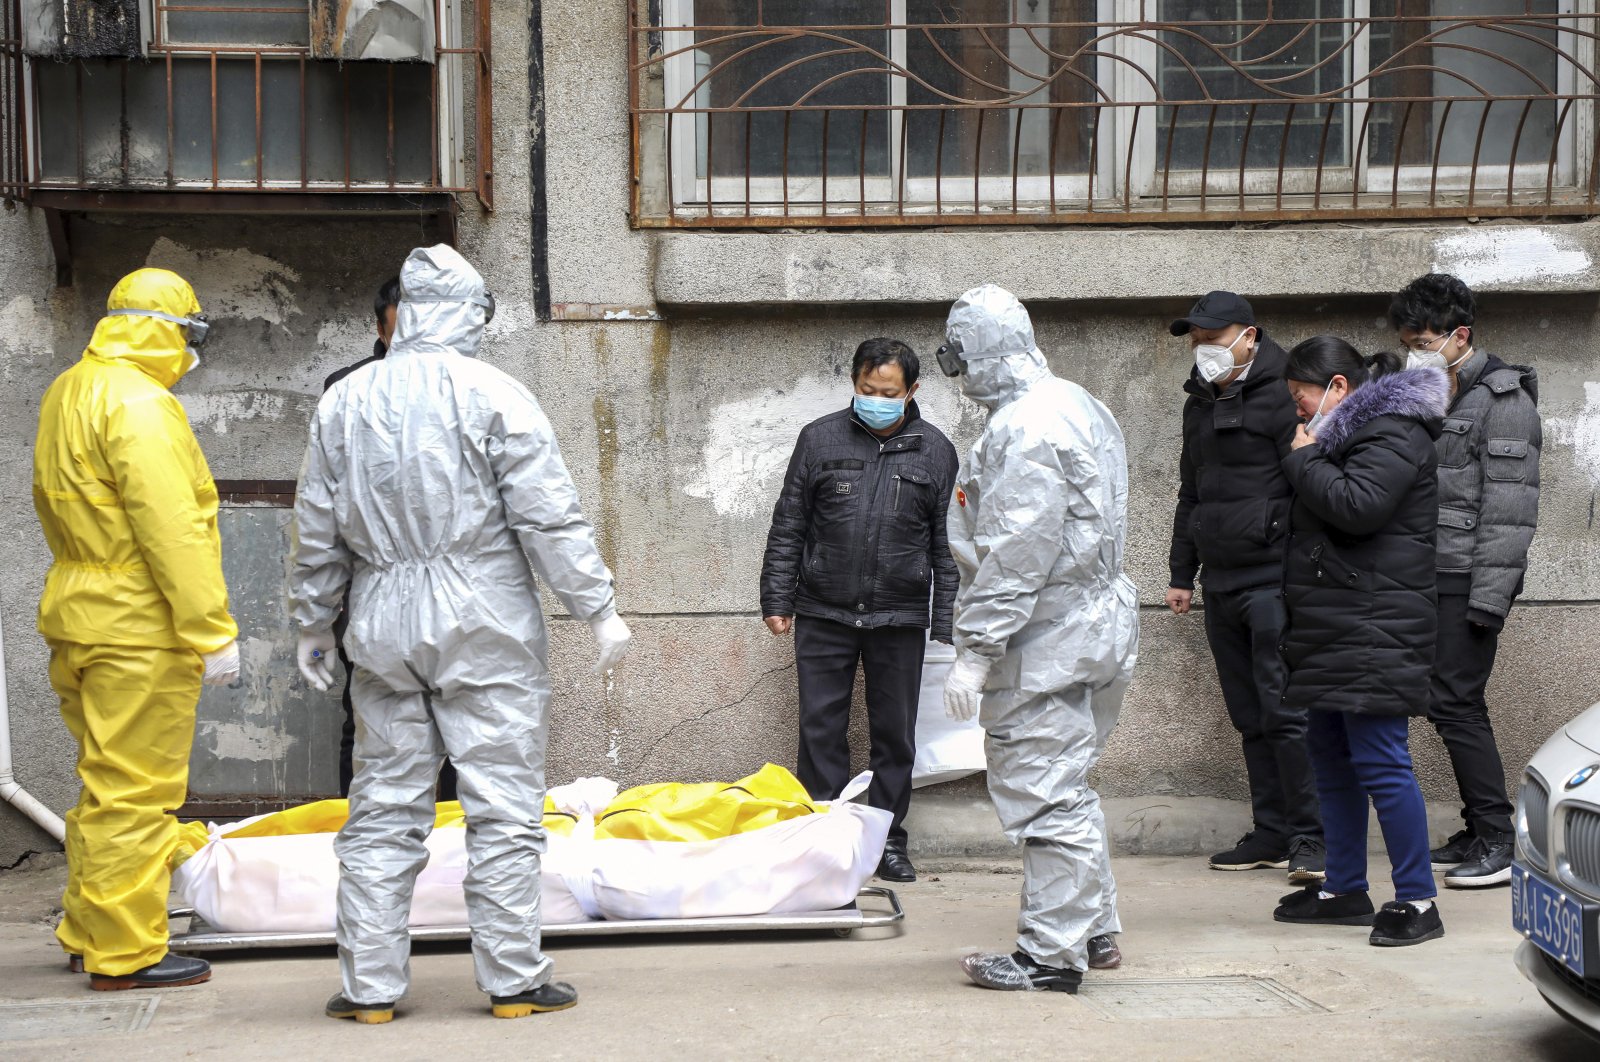 Funeral home workers remove the body of a person suspected to have died during the coronavirus outbreak from a residential building in Wuhan in central China's Hubei Province, Feb. 1, 2020. (Chinatopix via AP)